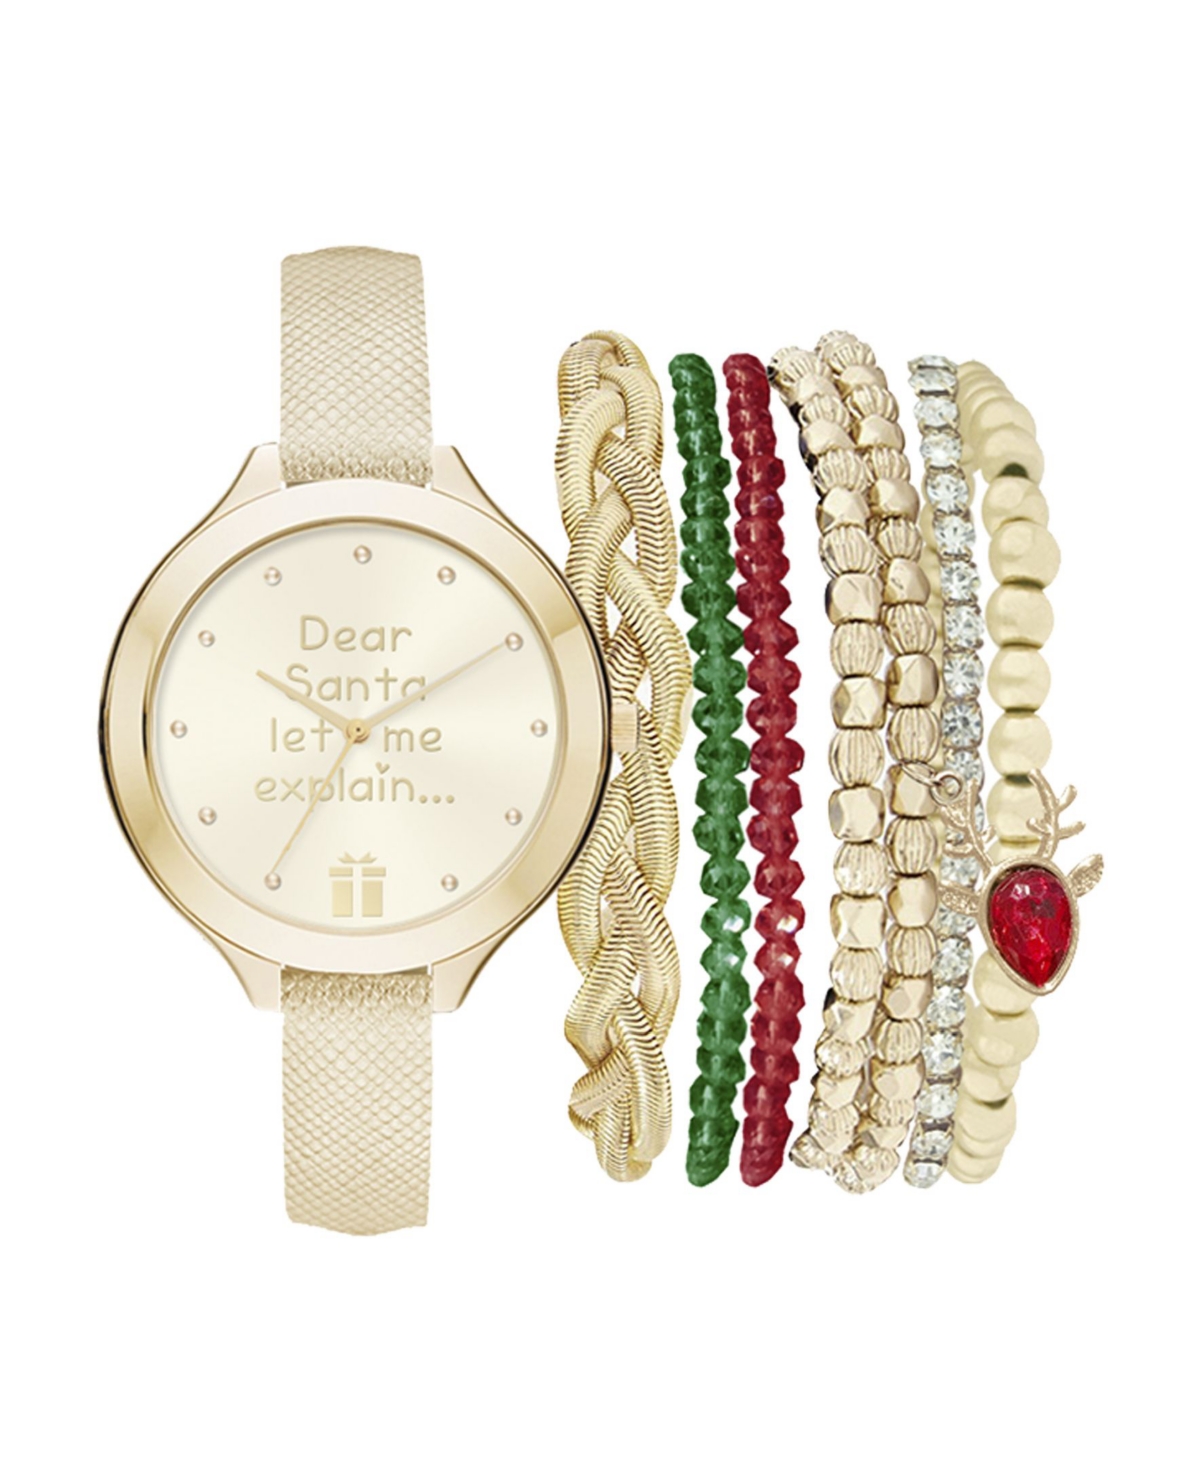 Women's Analog Dear Santa Strap Watch 34mm with Red, Green and Gold-Tone Bracelets Set - Gold-tone